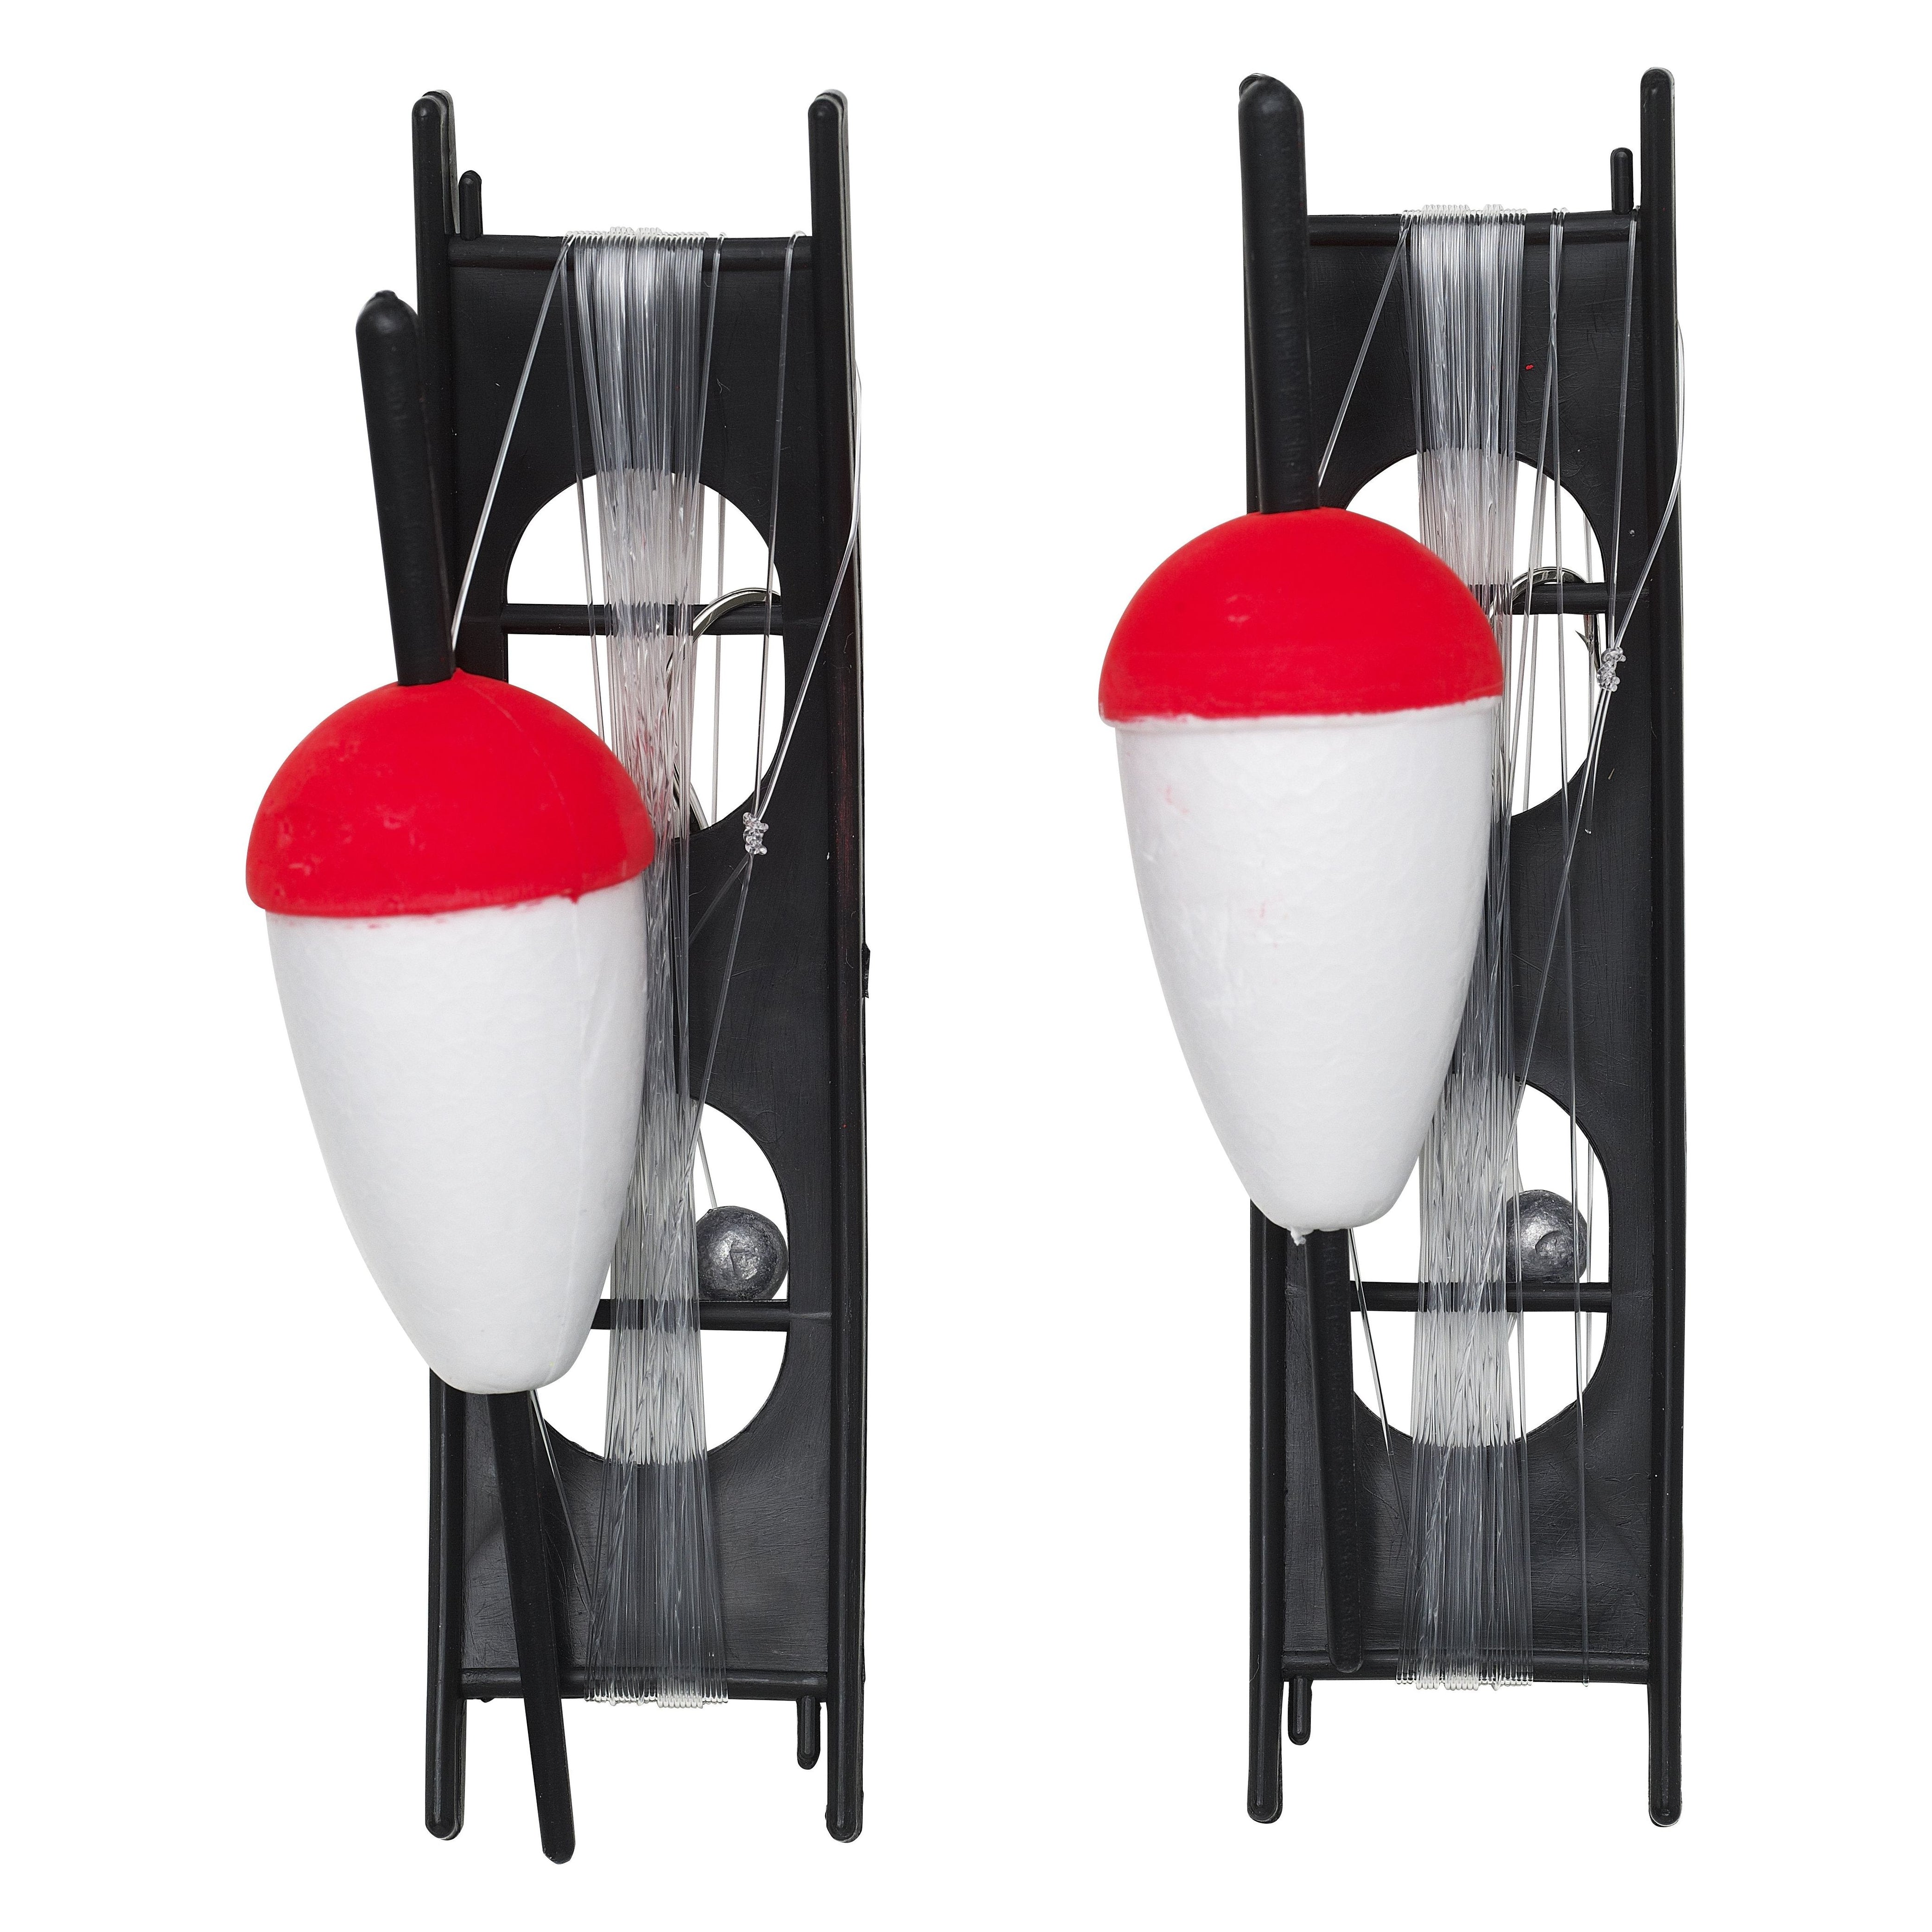 F666-228-071 KINETIC CLASSIC FLOAT KIT 40MM RED/WHITE 2PCS AT TED JOHNSONS PROBLEM SOLVED